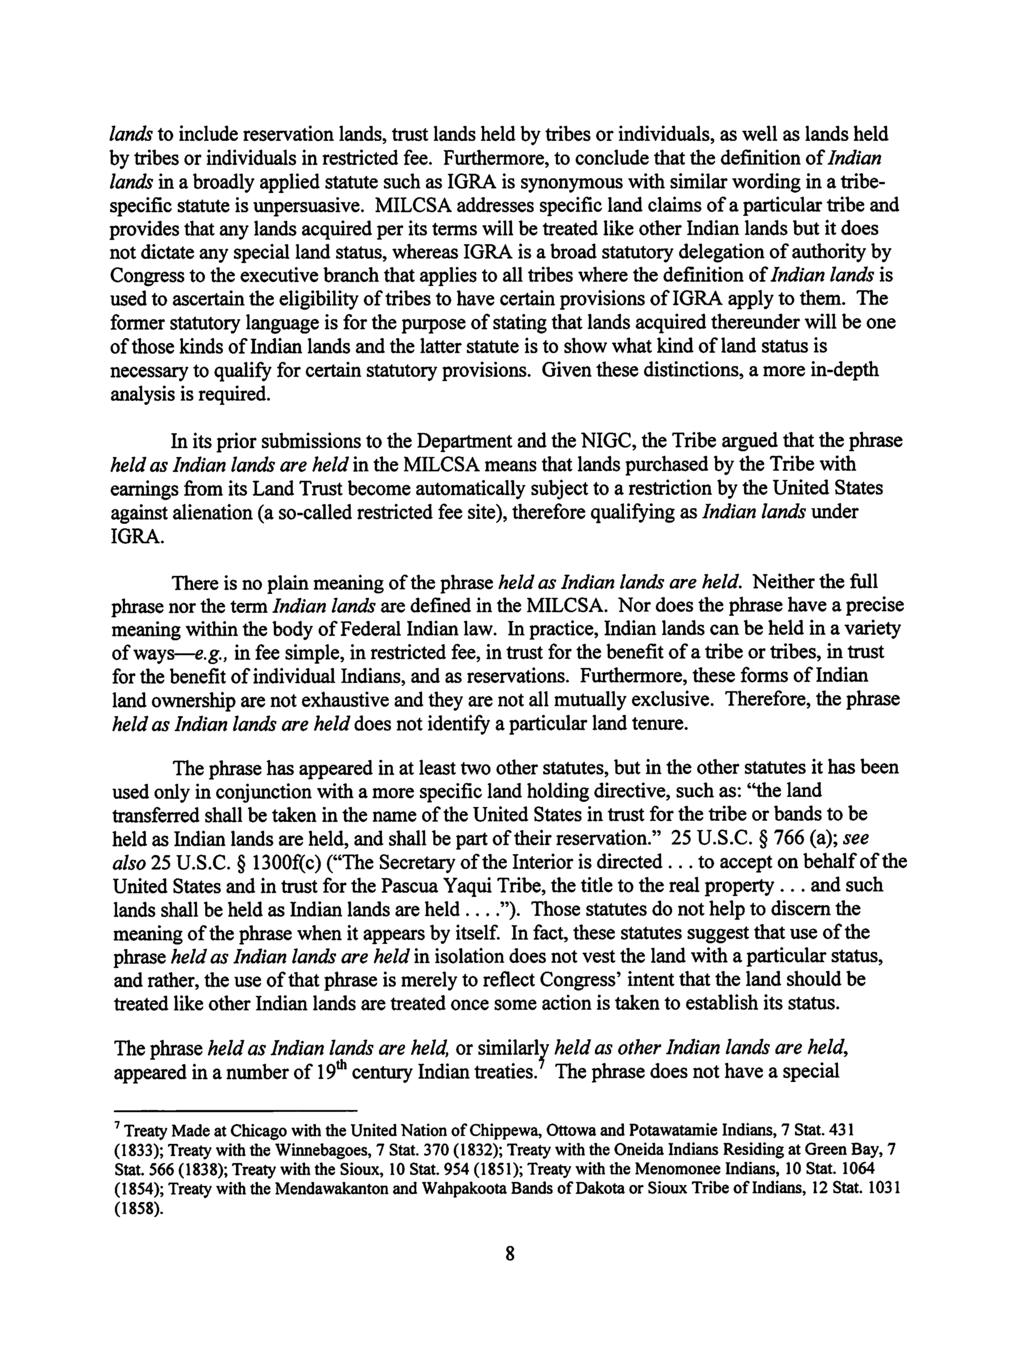 Case 1:18-cv-02035-TNM Document 1-1 Filed 08/30/18 Page 9 of 17 lands to include reservation lands, trust lands held by tribes or individuals, as well as lands held by tribes or individuals in